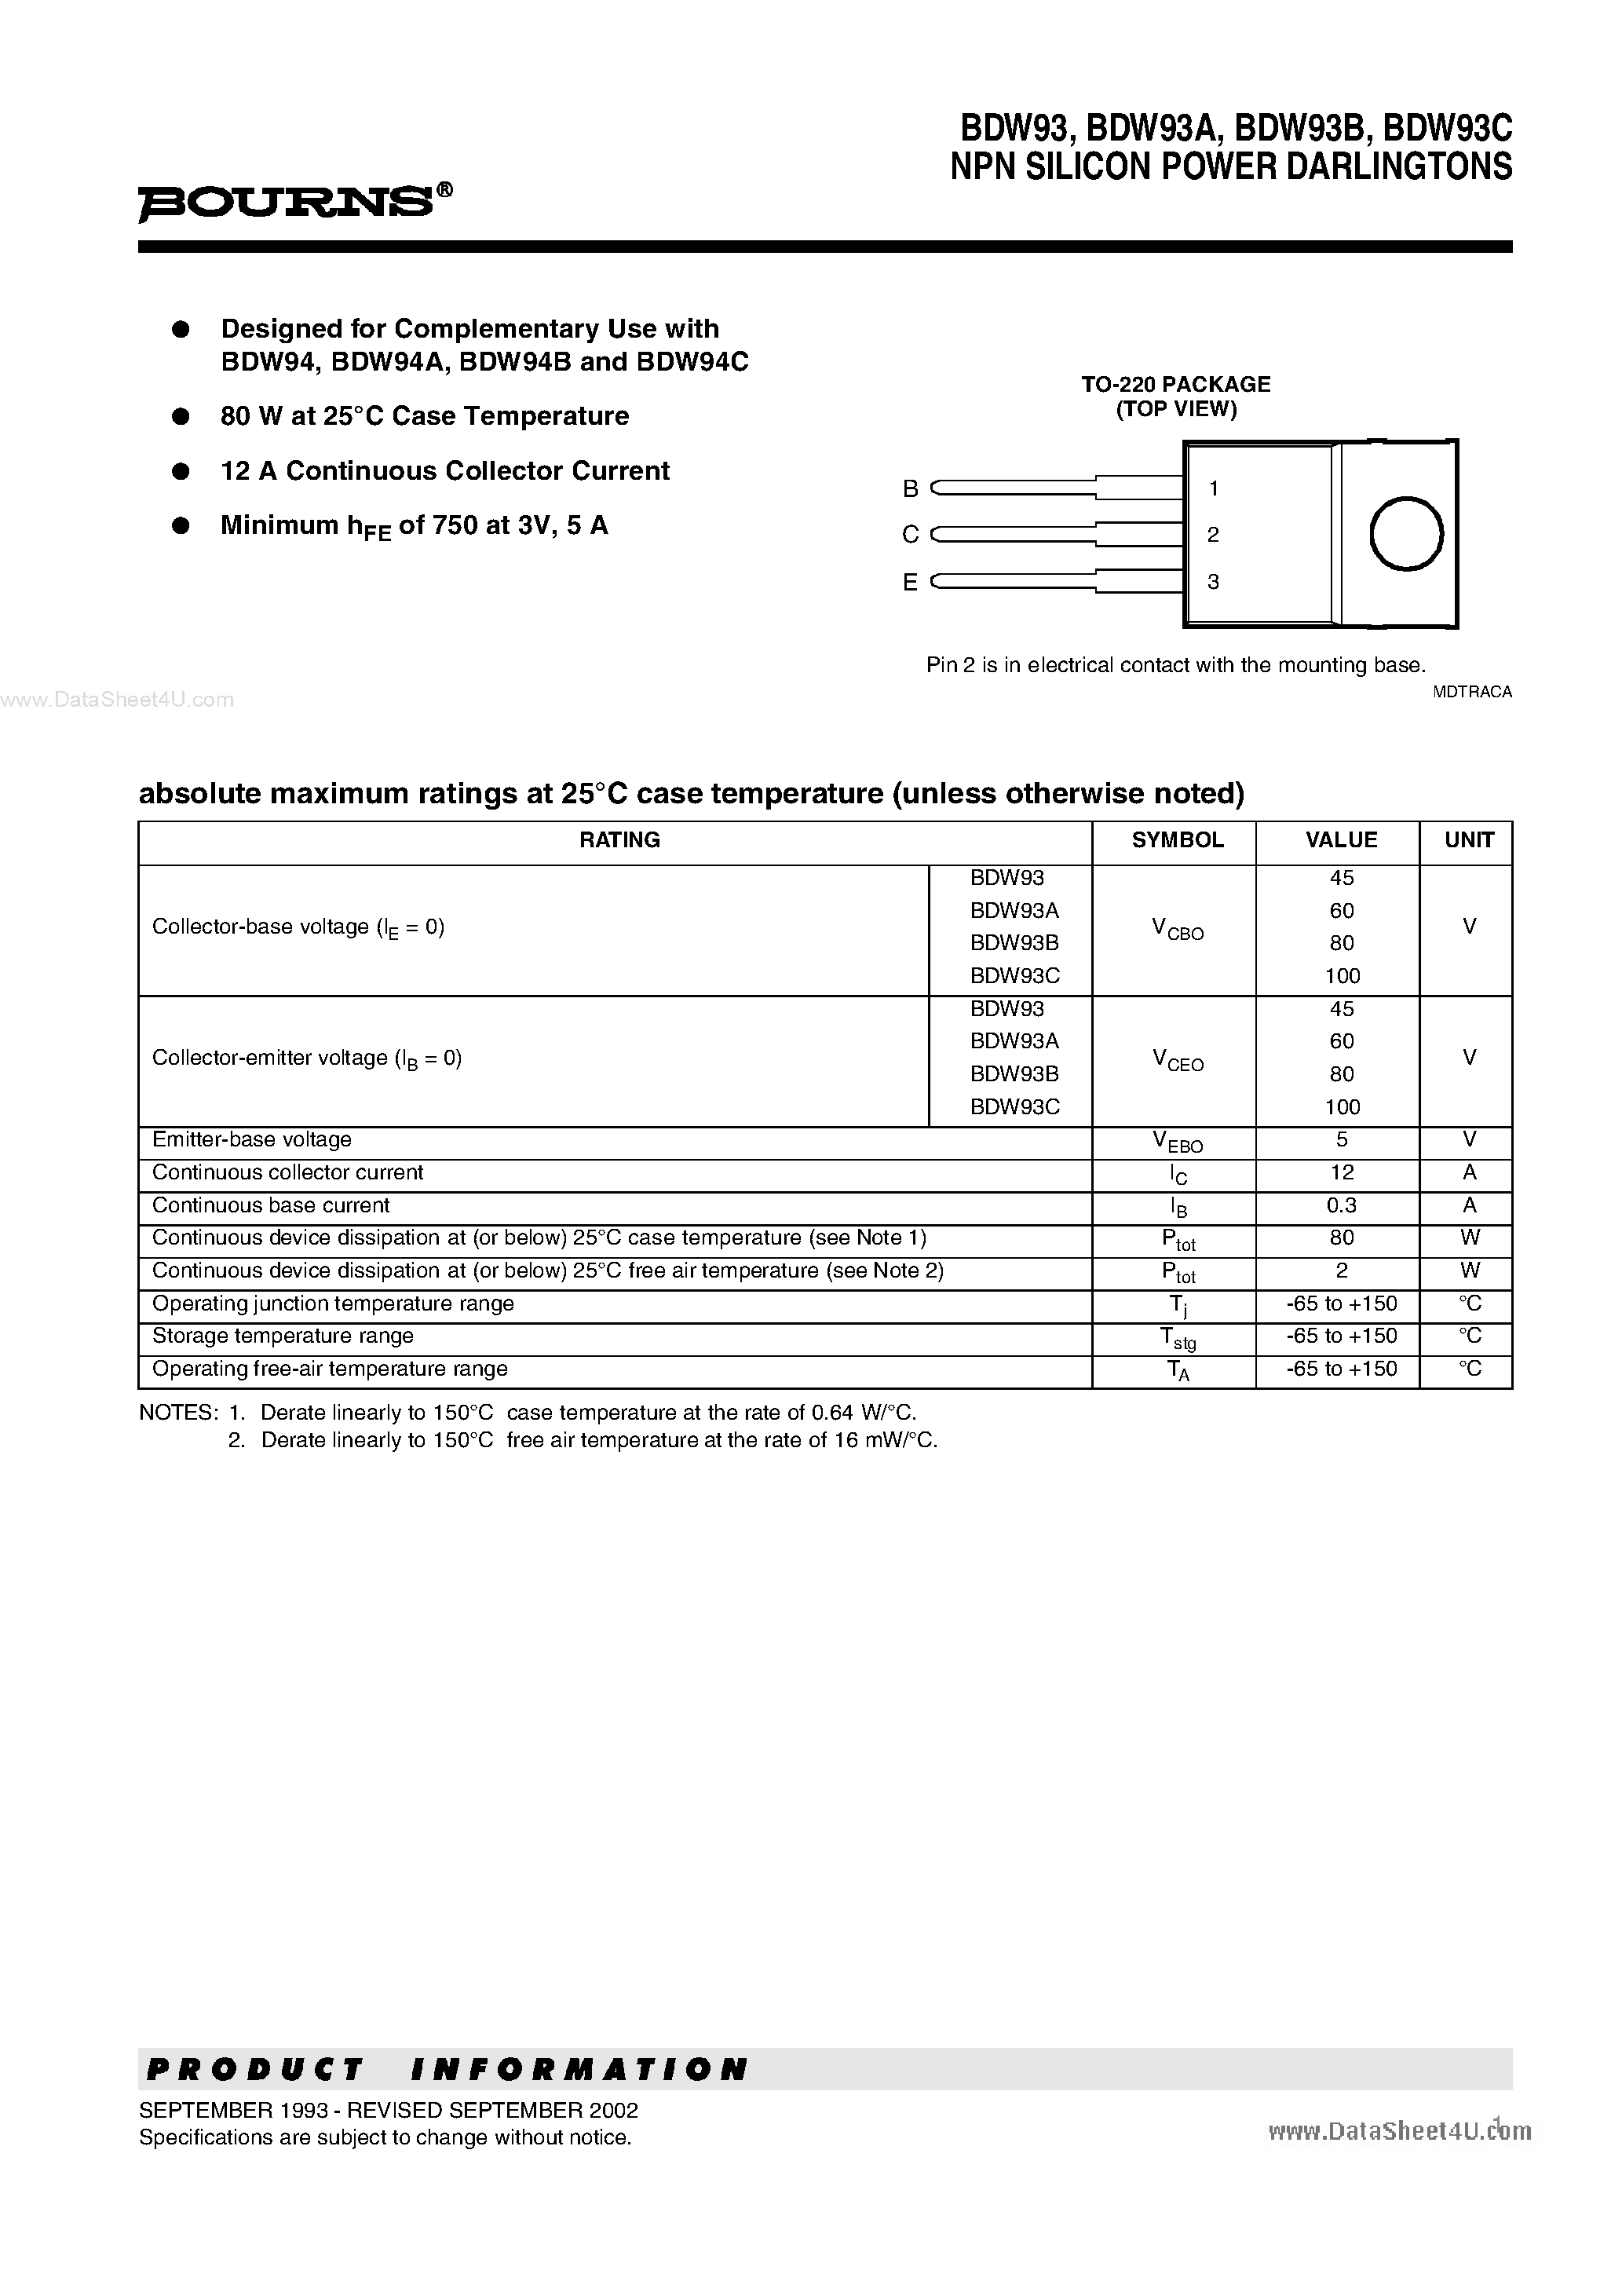 Datasheet BDW93 - NPN SILICON POWER DARLINGTONS page 1